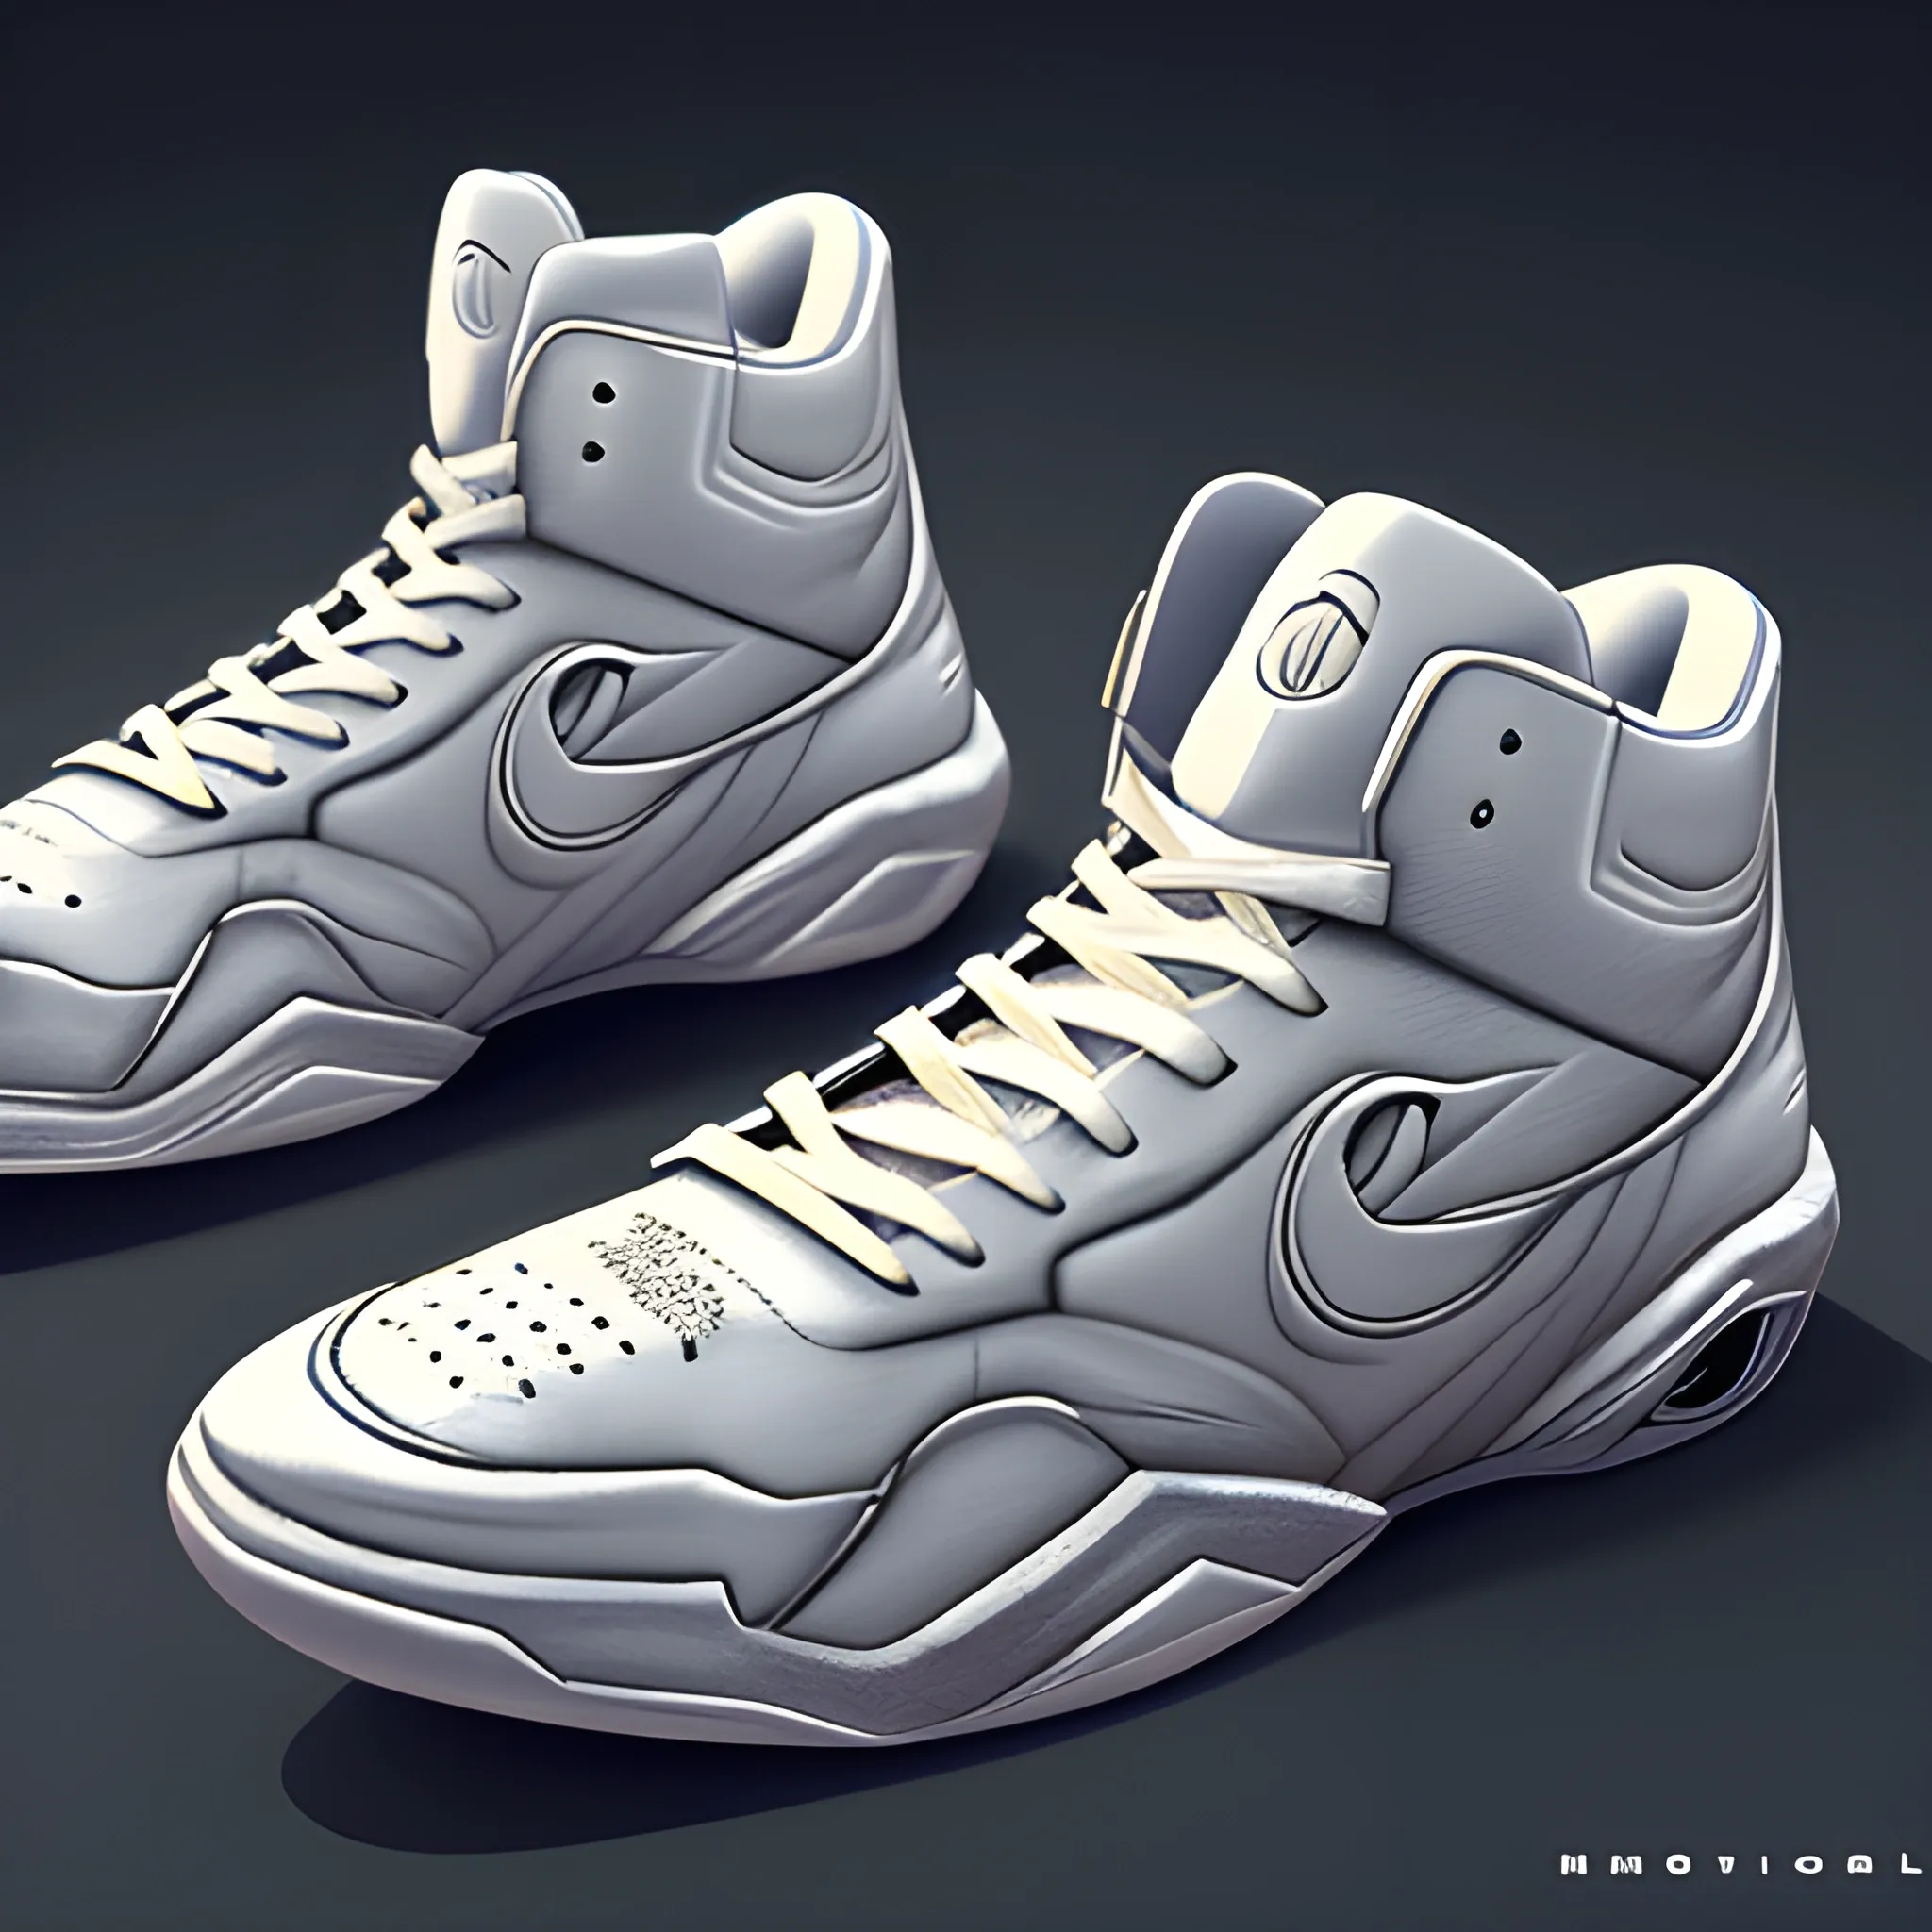 Concept Moon Knight basketball sneakers, popular in art station, soft feel, bloated, smooth, sharp focus
